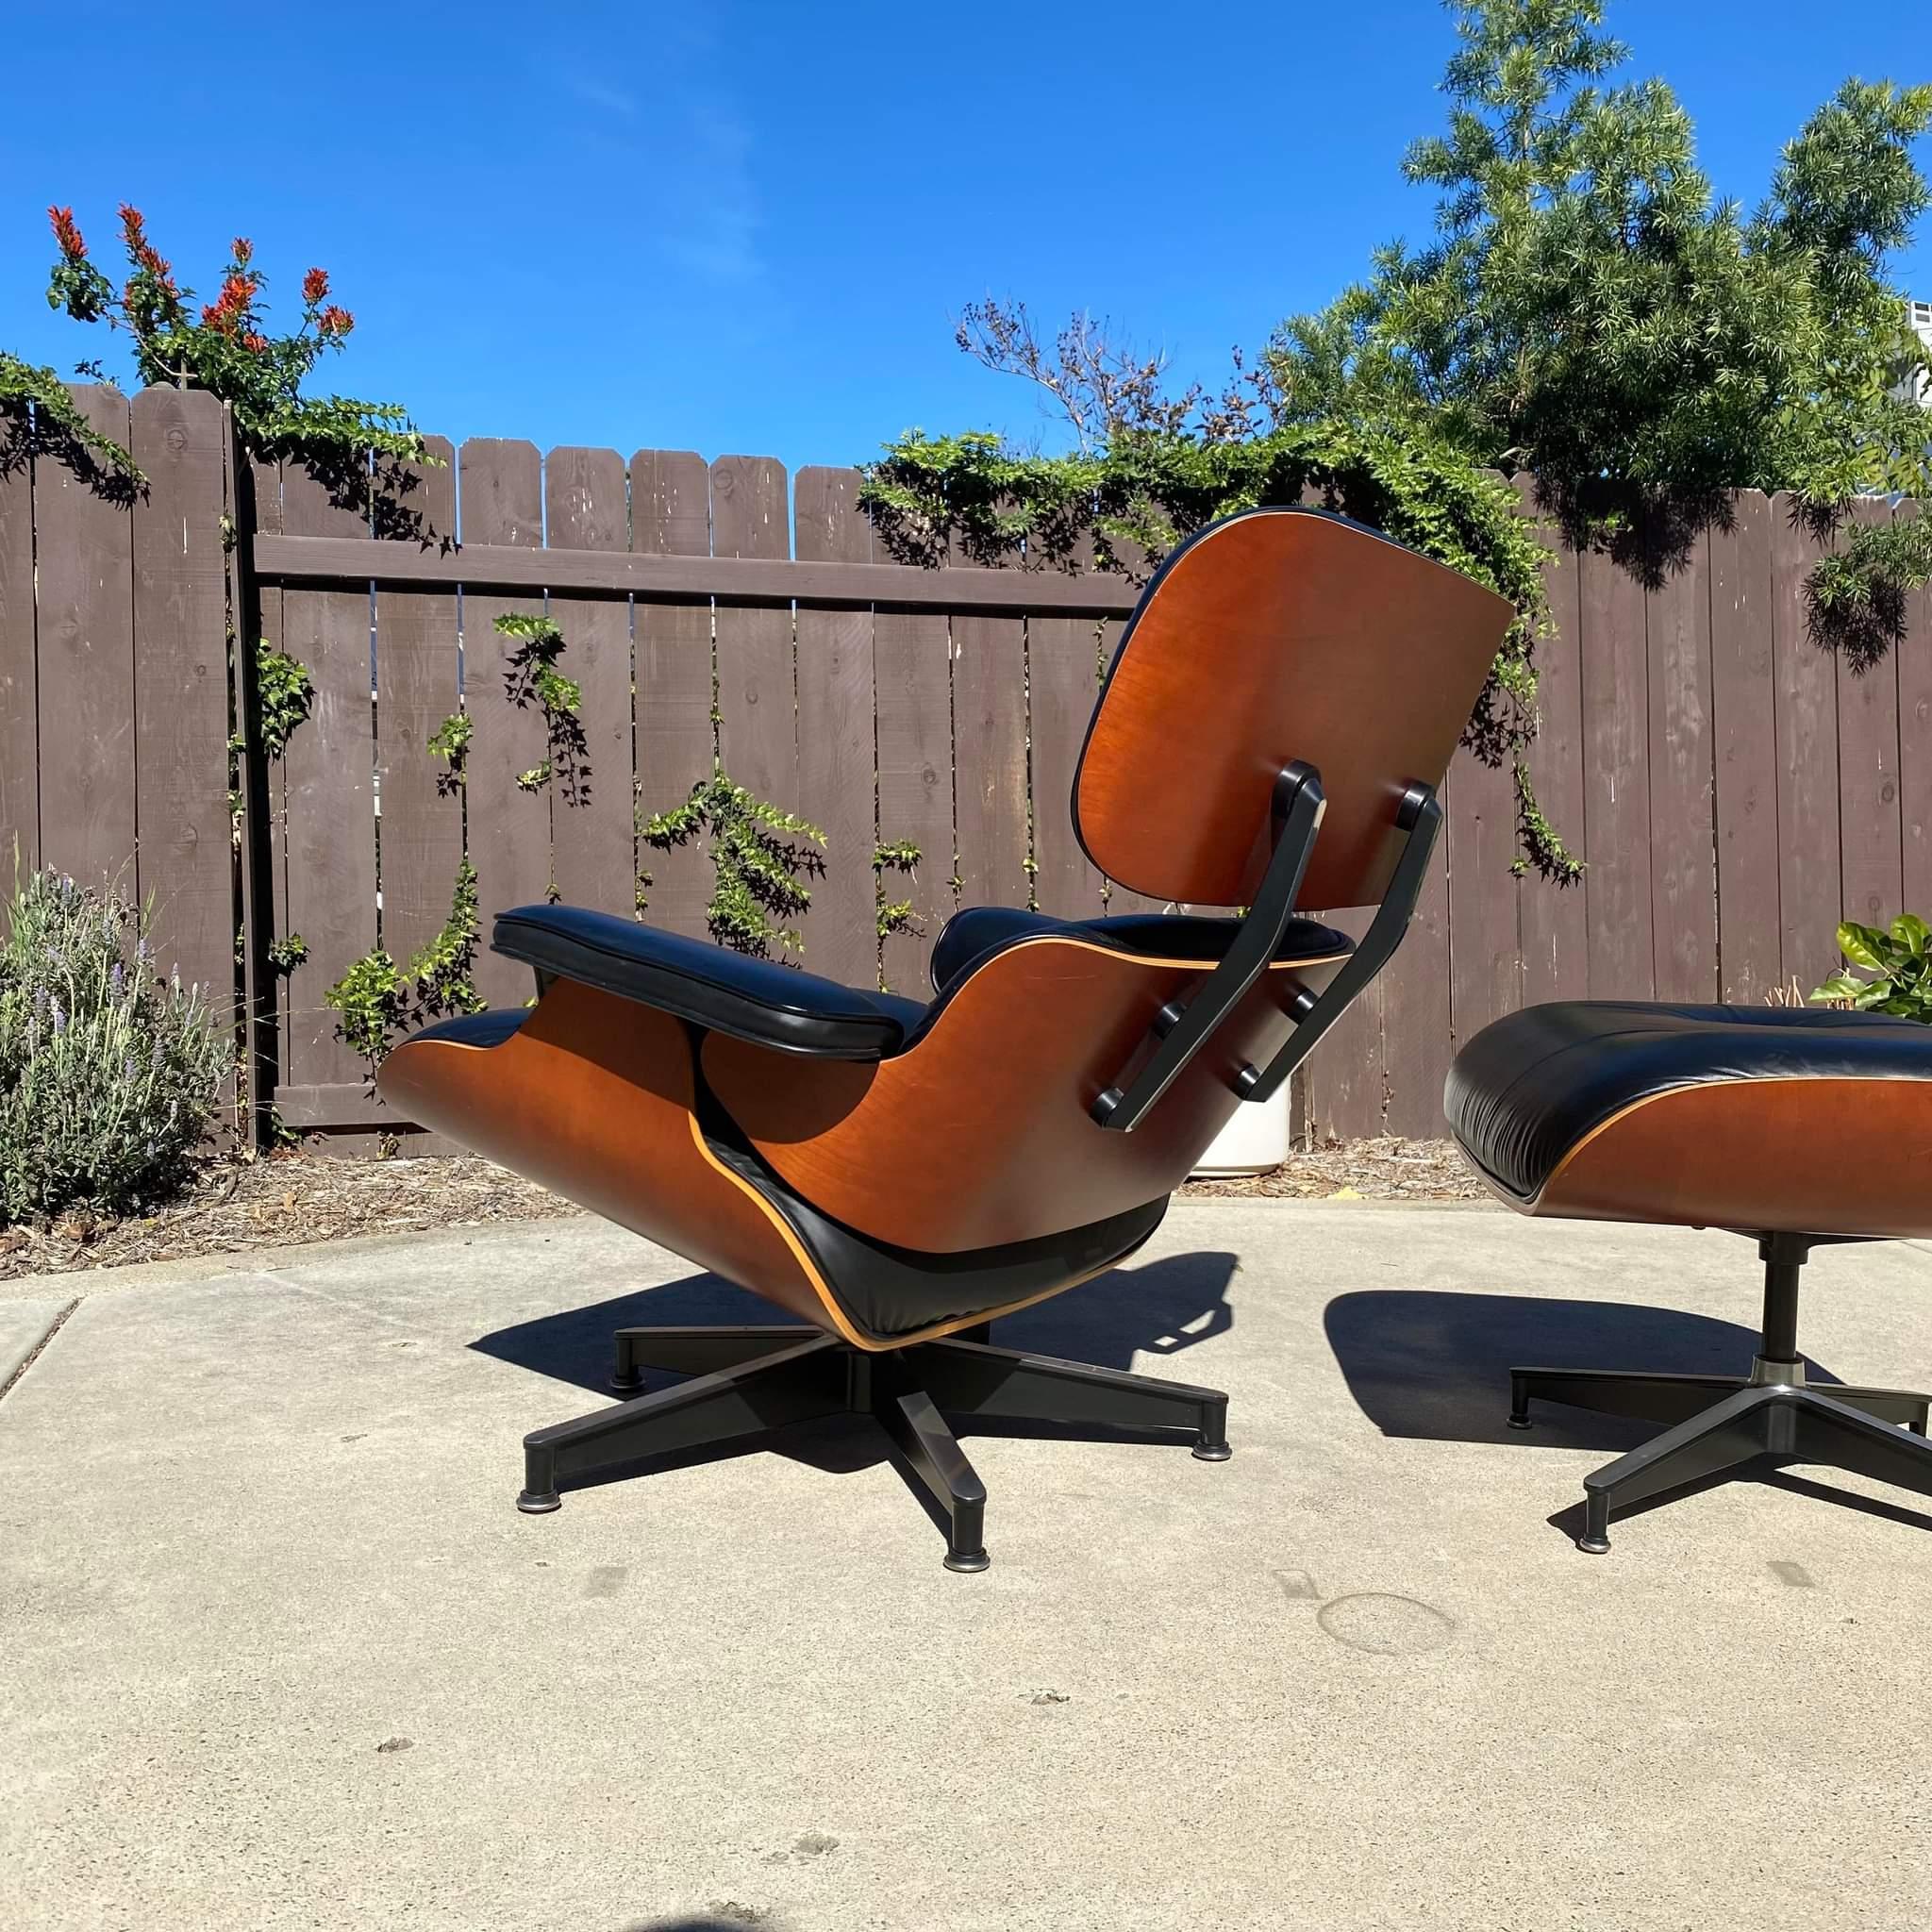 Now available is a rare collectable lounge chair and ottoman by Herman Miller. To commemorate the 50th anniversary of the design by Ray and Charles Eames, this beauty was released in 2006 with a cherry wood finish and black leather. Undoubtedly an